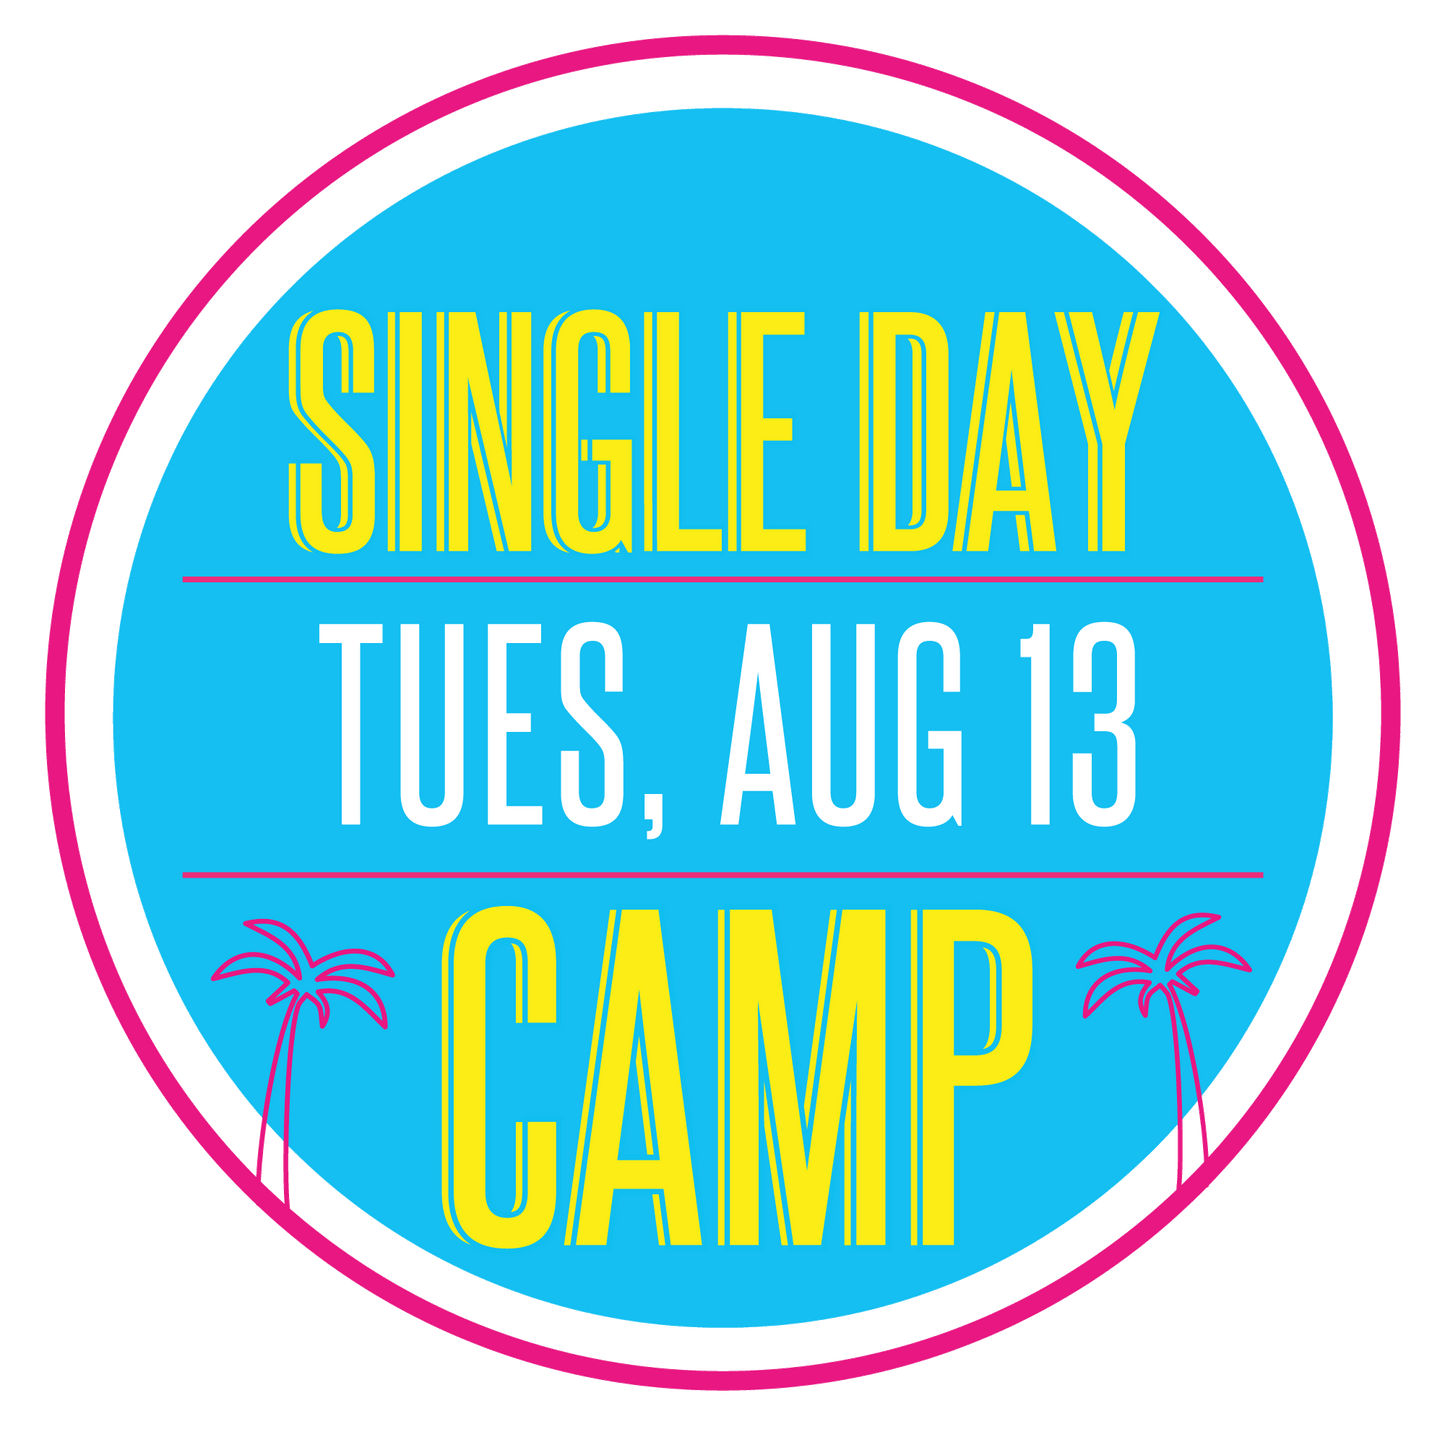 Single Day Sewing Workshop: Tuesday, August 13, 9am-3pm